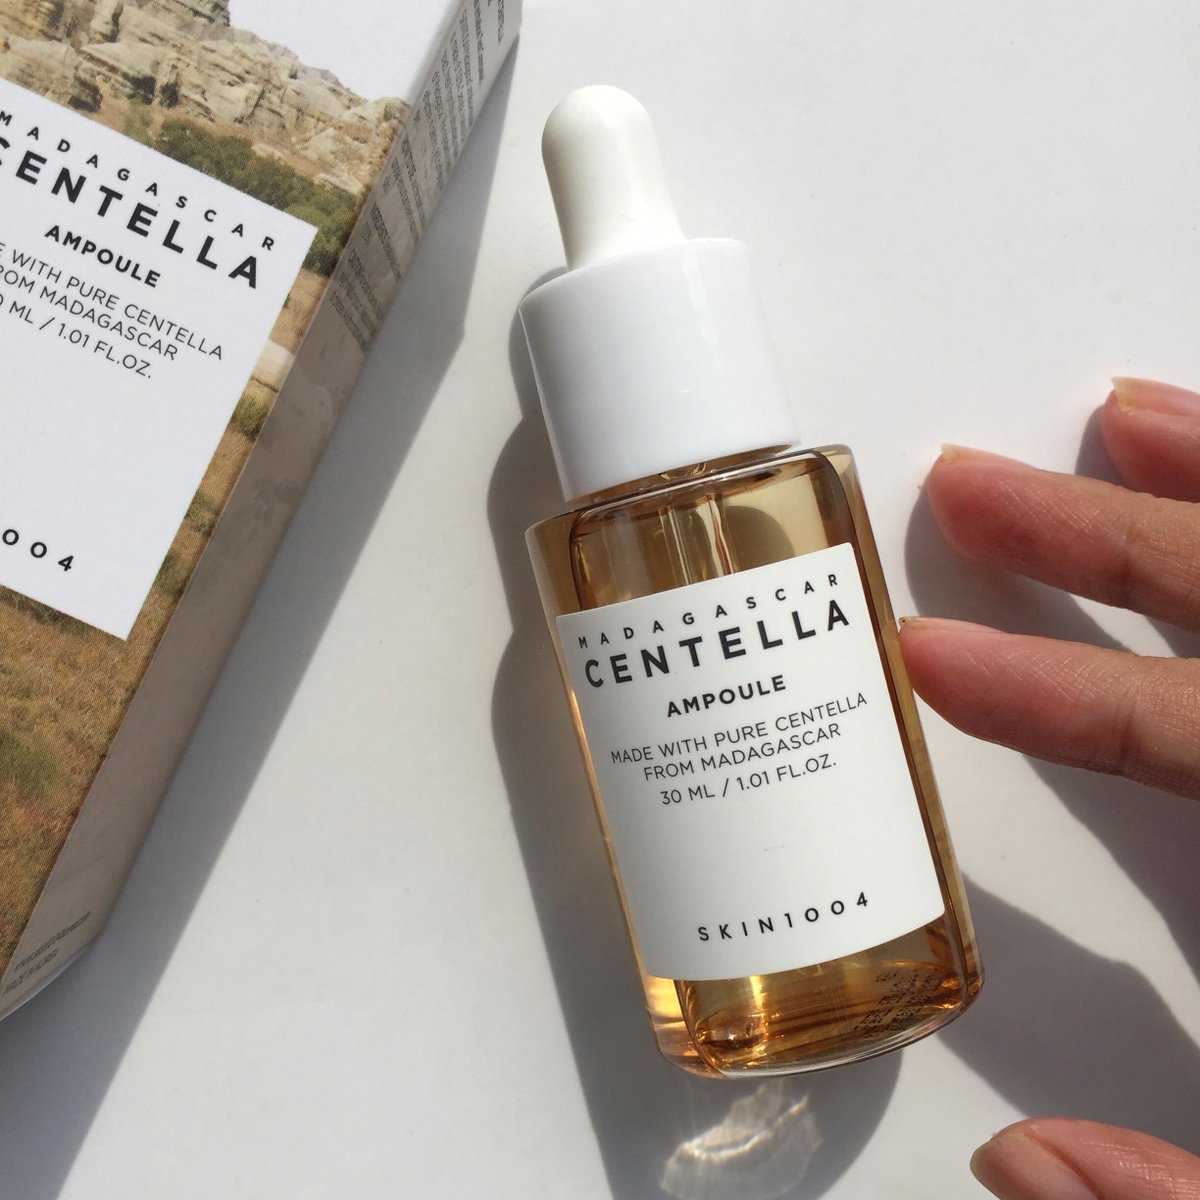 8. Skin1004 Madagascar Centella Asiatica Ampoule 30mlPrice: RM30- A light weight ampoule- brighten up the scars- contain 30% Centella Asiatica that can calm an angry skinphoto credit to beauty_tribes